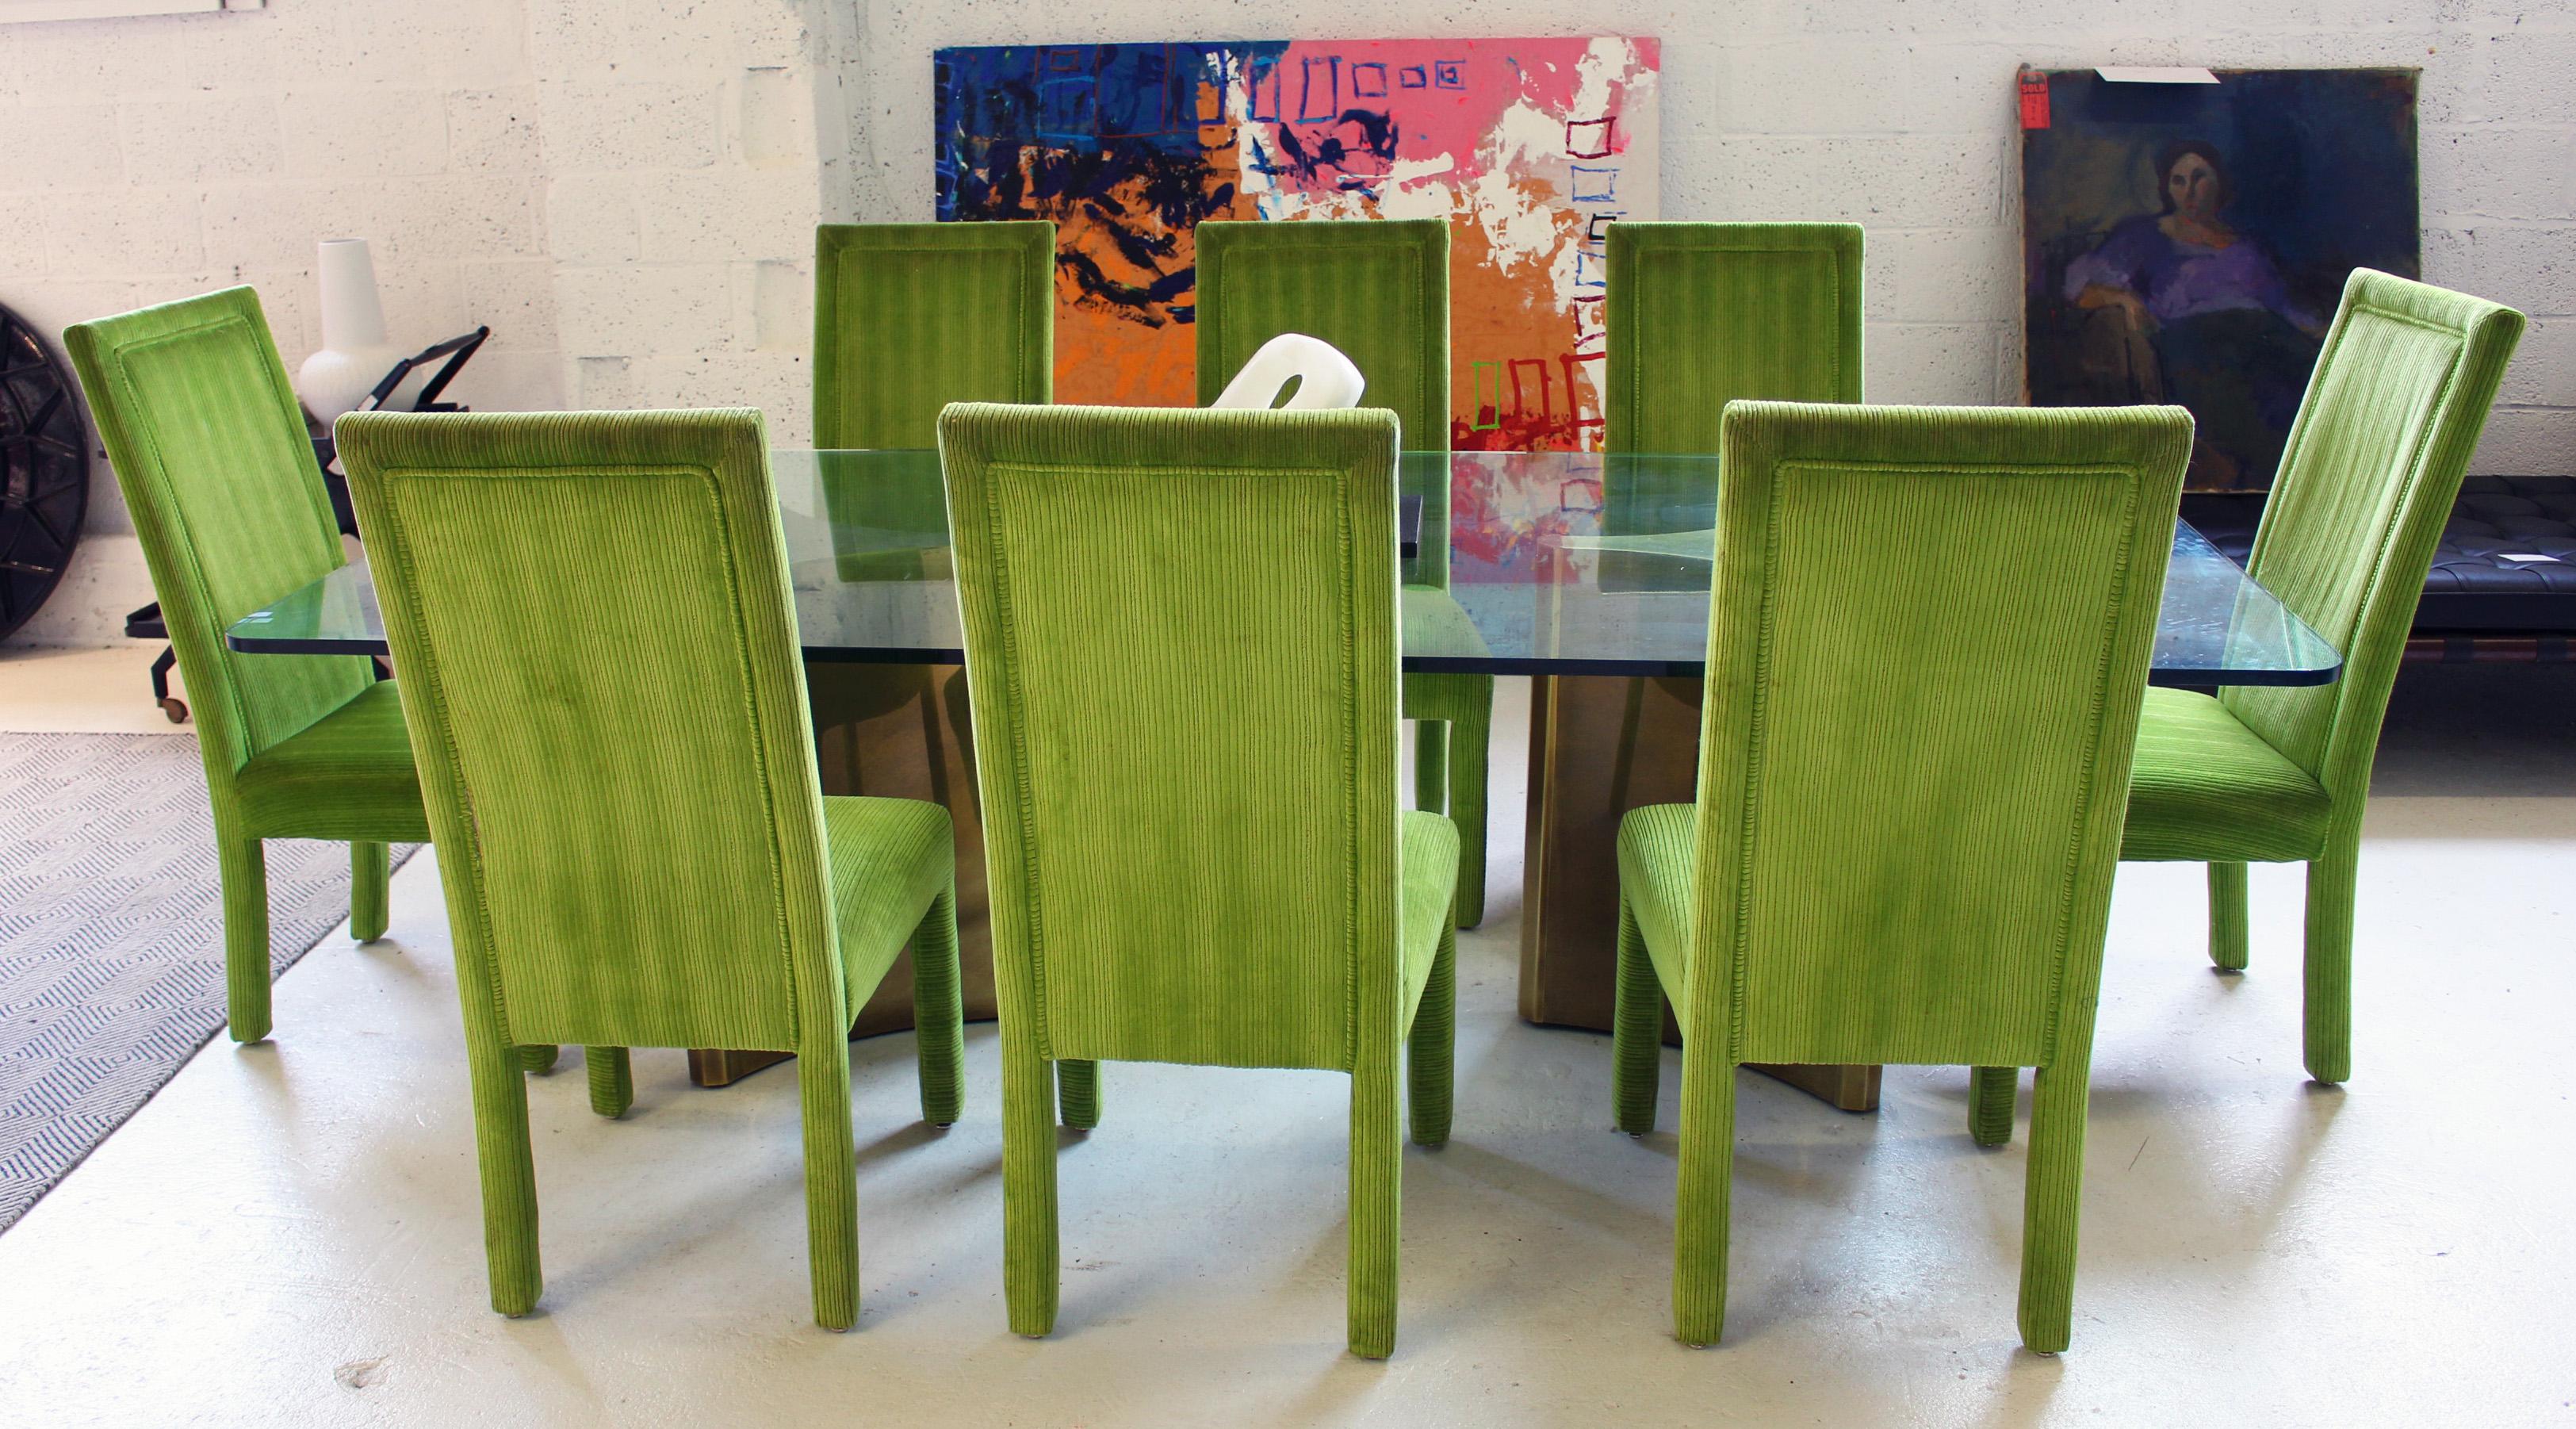 A beautiful set of 8 vintage dining chairs will instantly add a great accent color to your dining room.